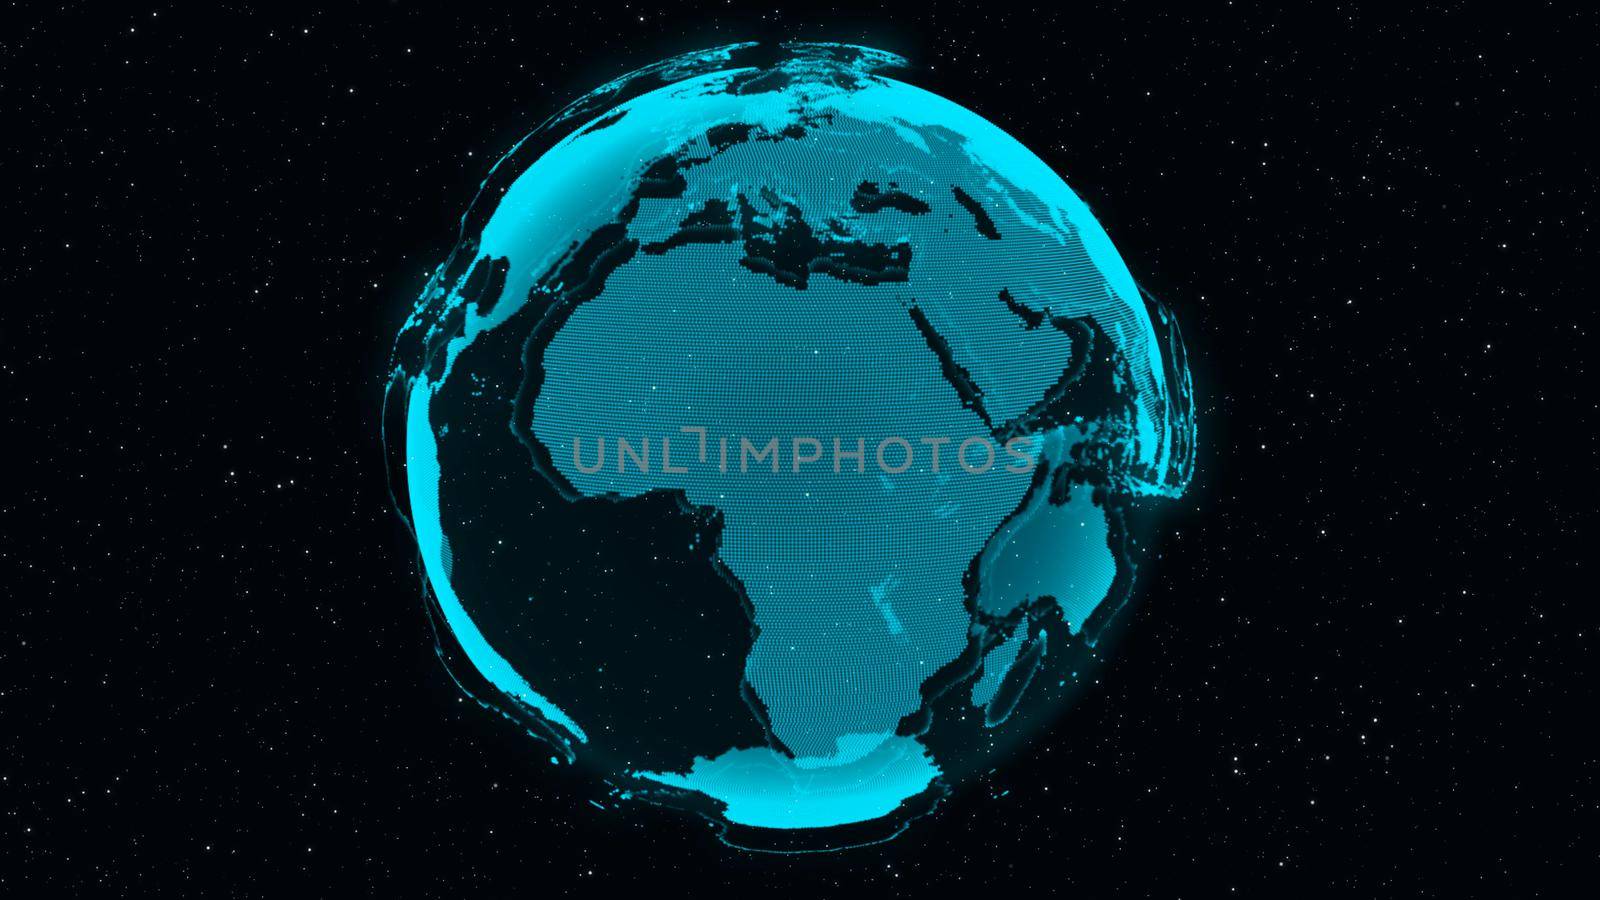 3D Digital Earth shows concept of global network by biancoblue